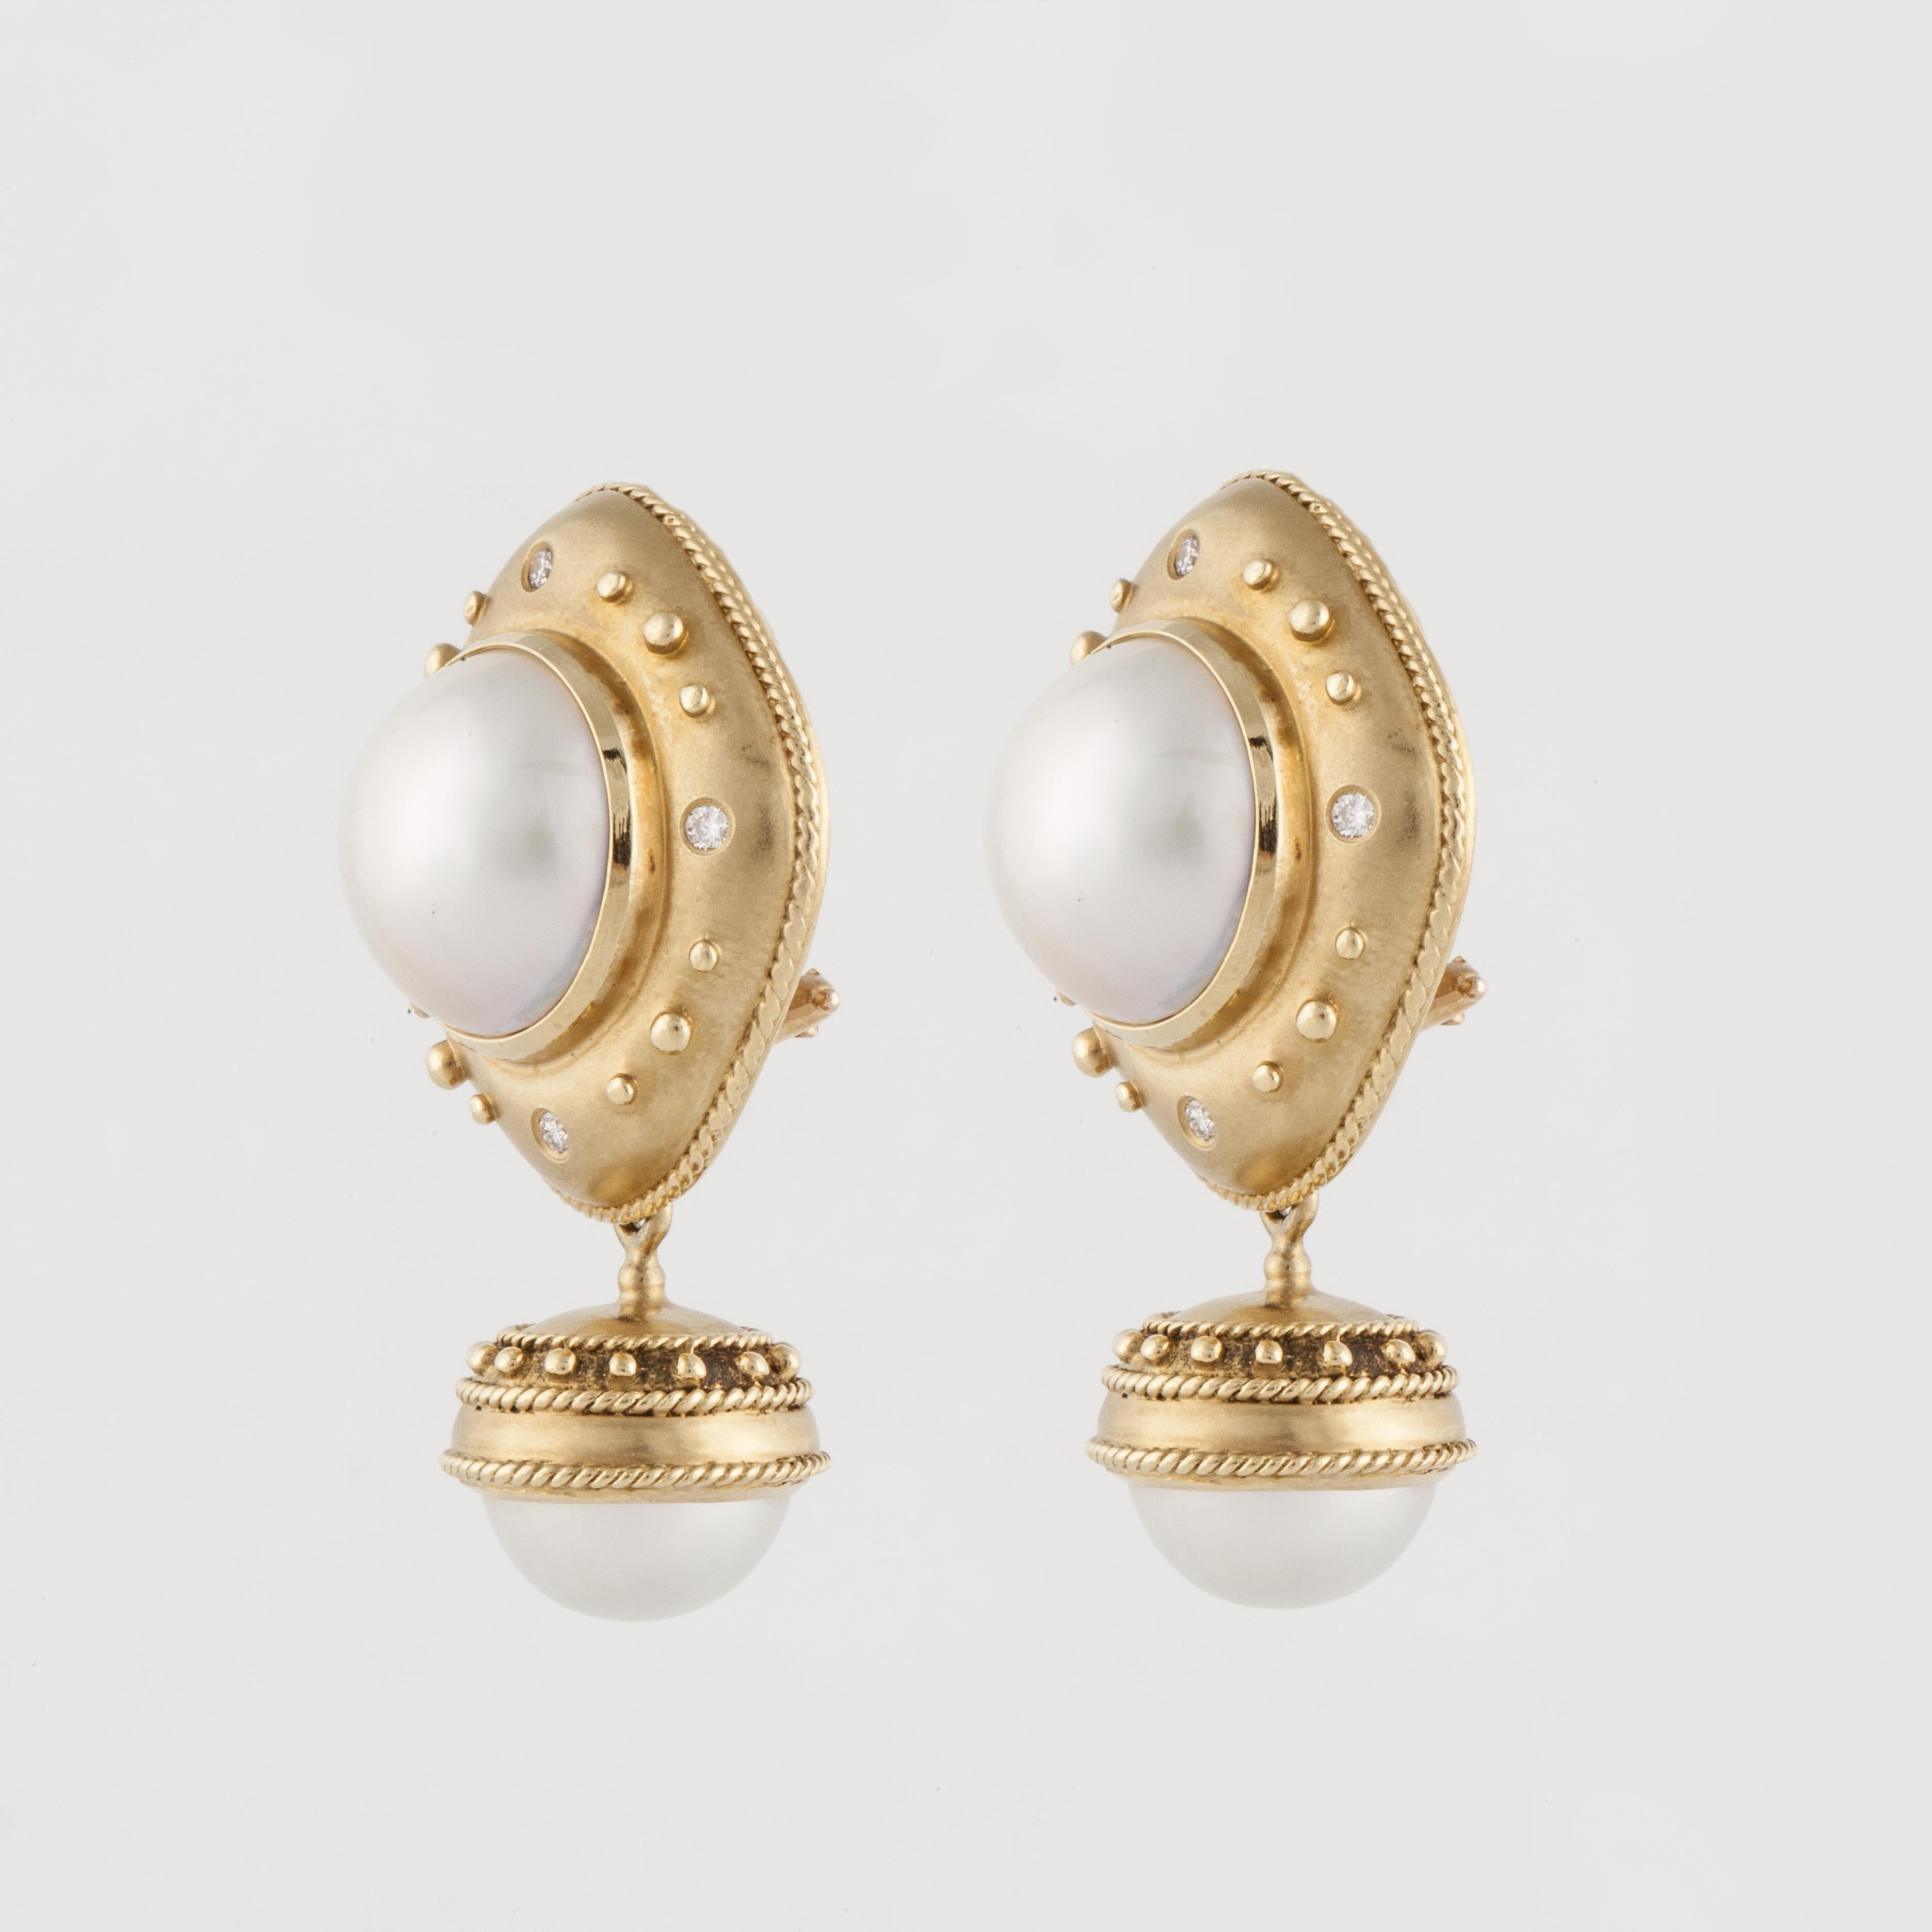 Earrings in 18K yellow brushed gold and feature Mabé pearls and detachable pearl dangles.   There are eight (8) round diamonds that total 0.20 carats.  These earrings are clip style but a post could easily be added.  They measure 1 1/2 inches long